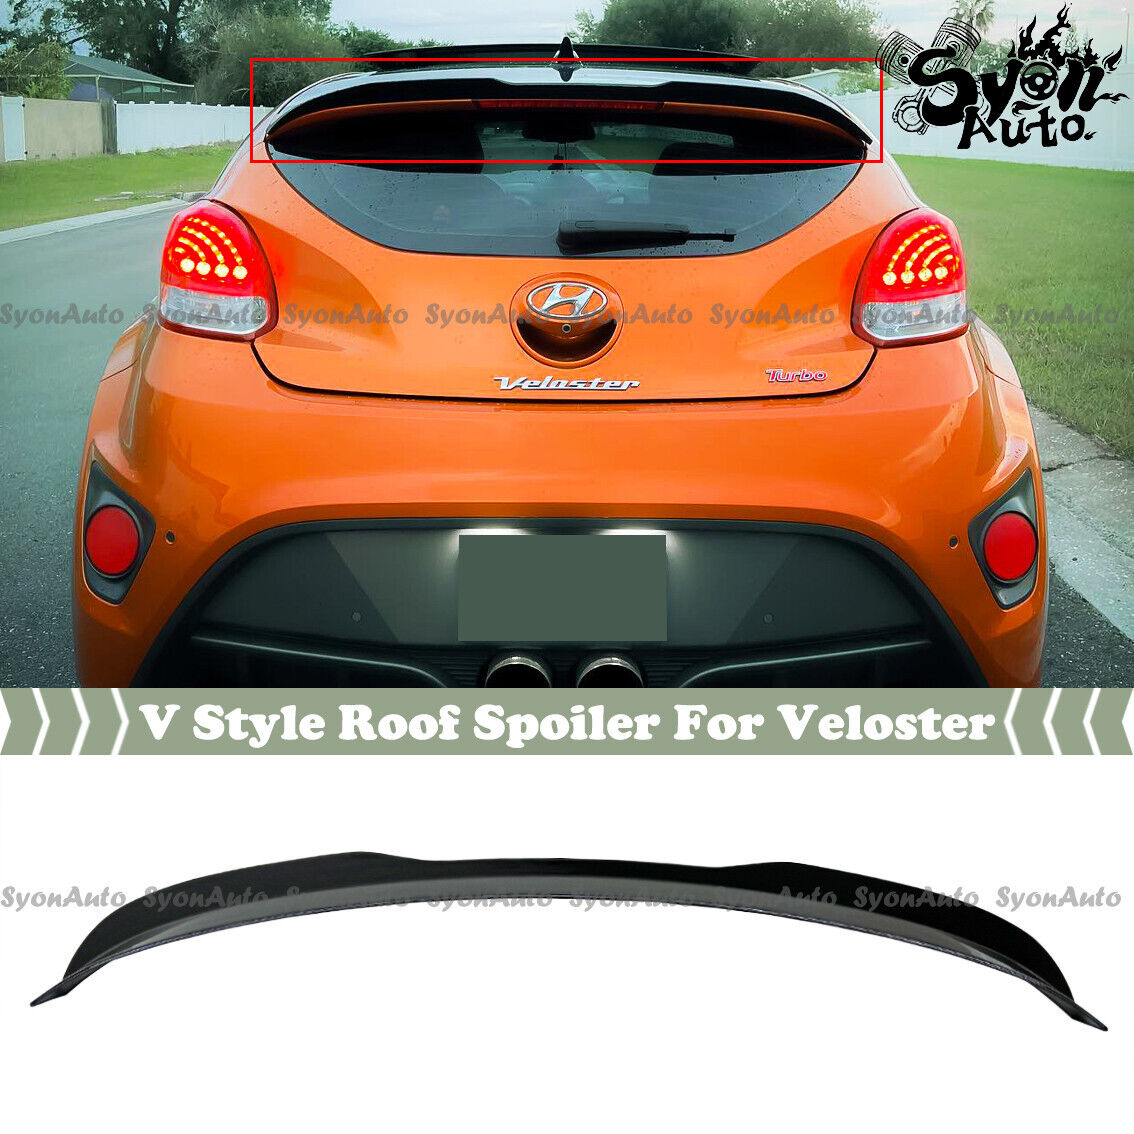 FITS 2012-2018 HYUNDAI VELOSTER TURBO GLOSSY BLACK V STYLE ROOF SPOILER WING LID